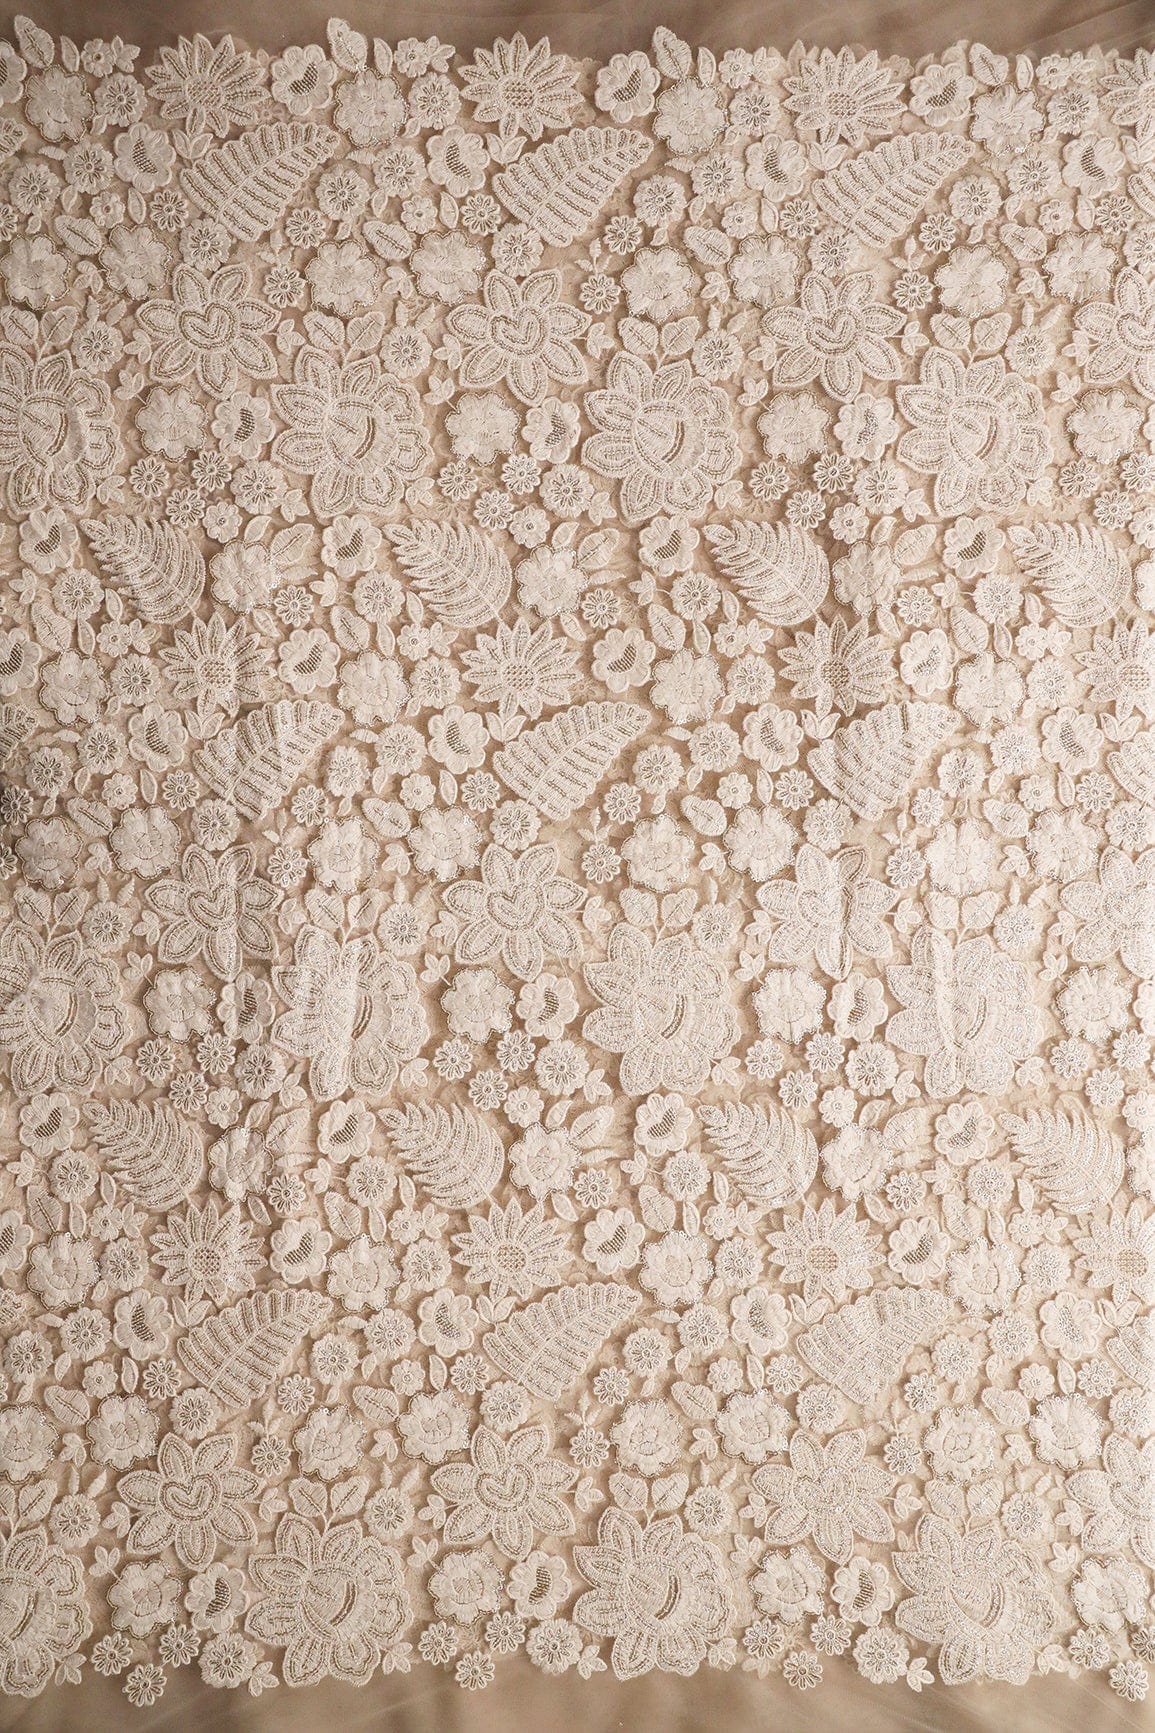 doeraa Embroidery Fabrics White Thread With Sequins Heavy Floral Embroidery On Light Beige Soft Net Fabric